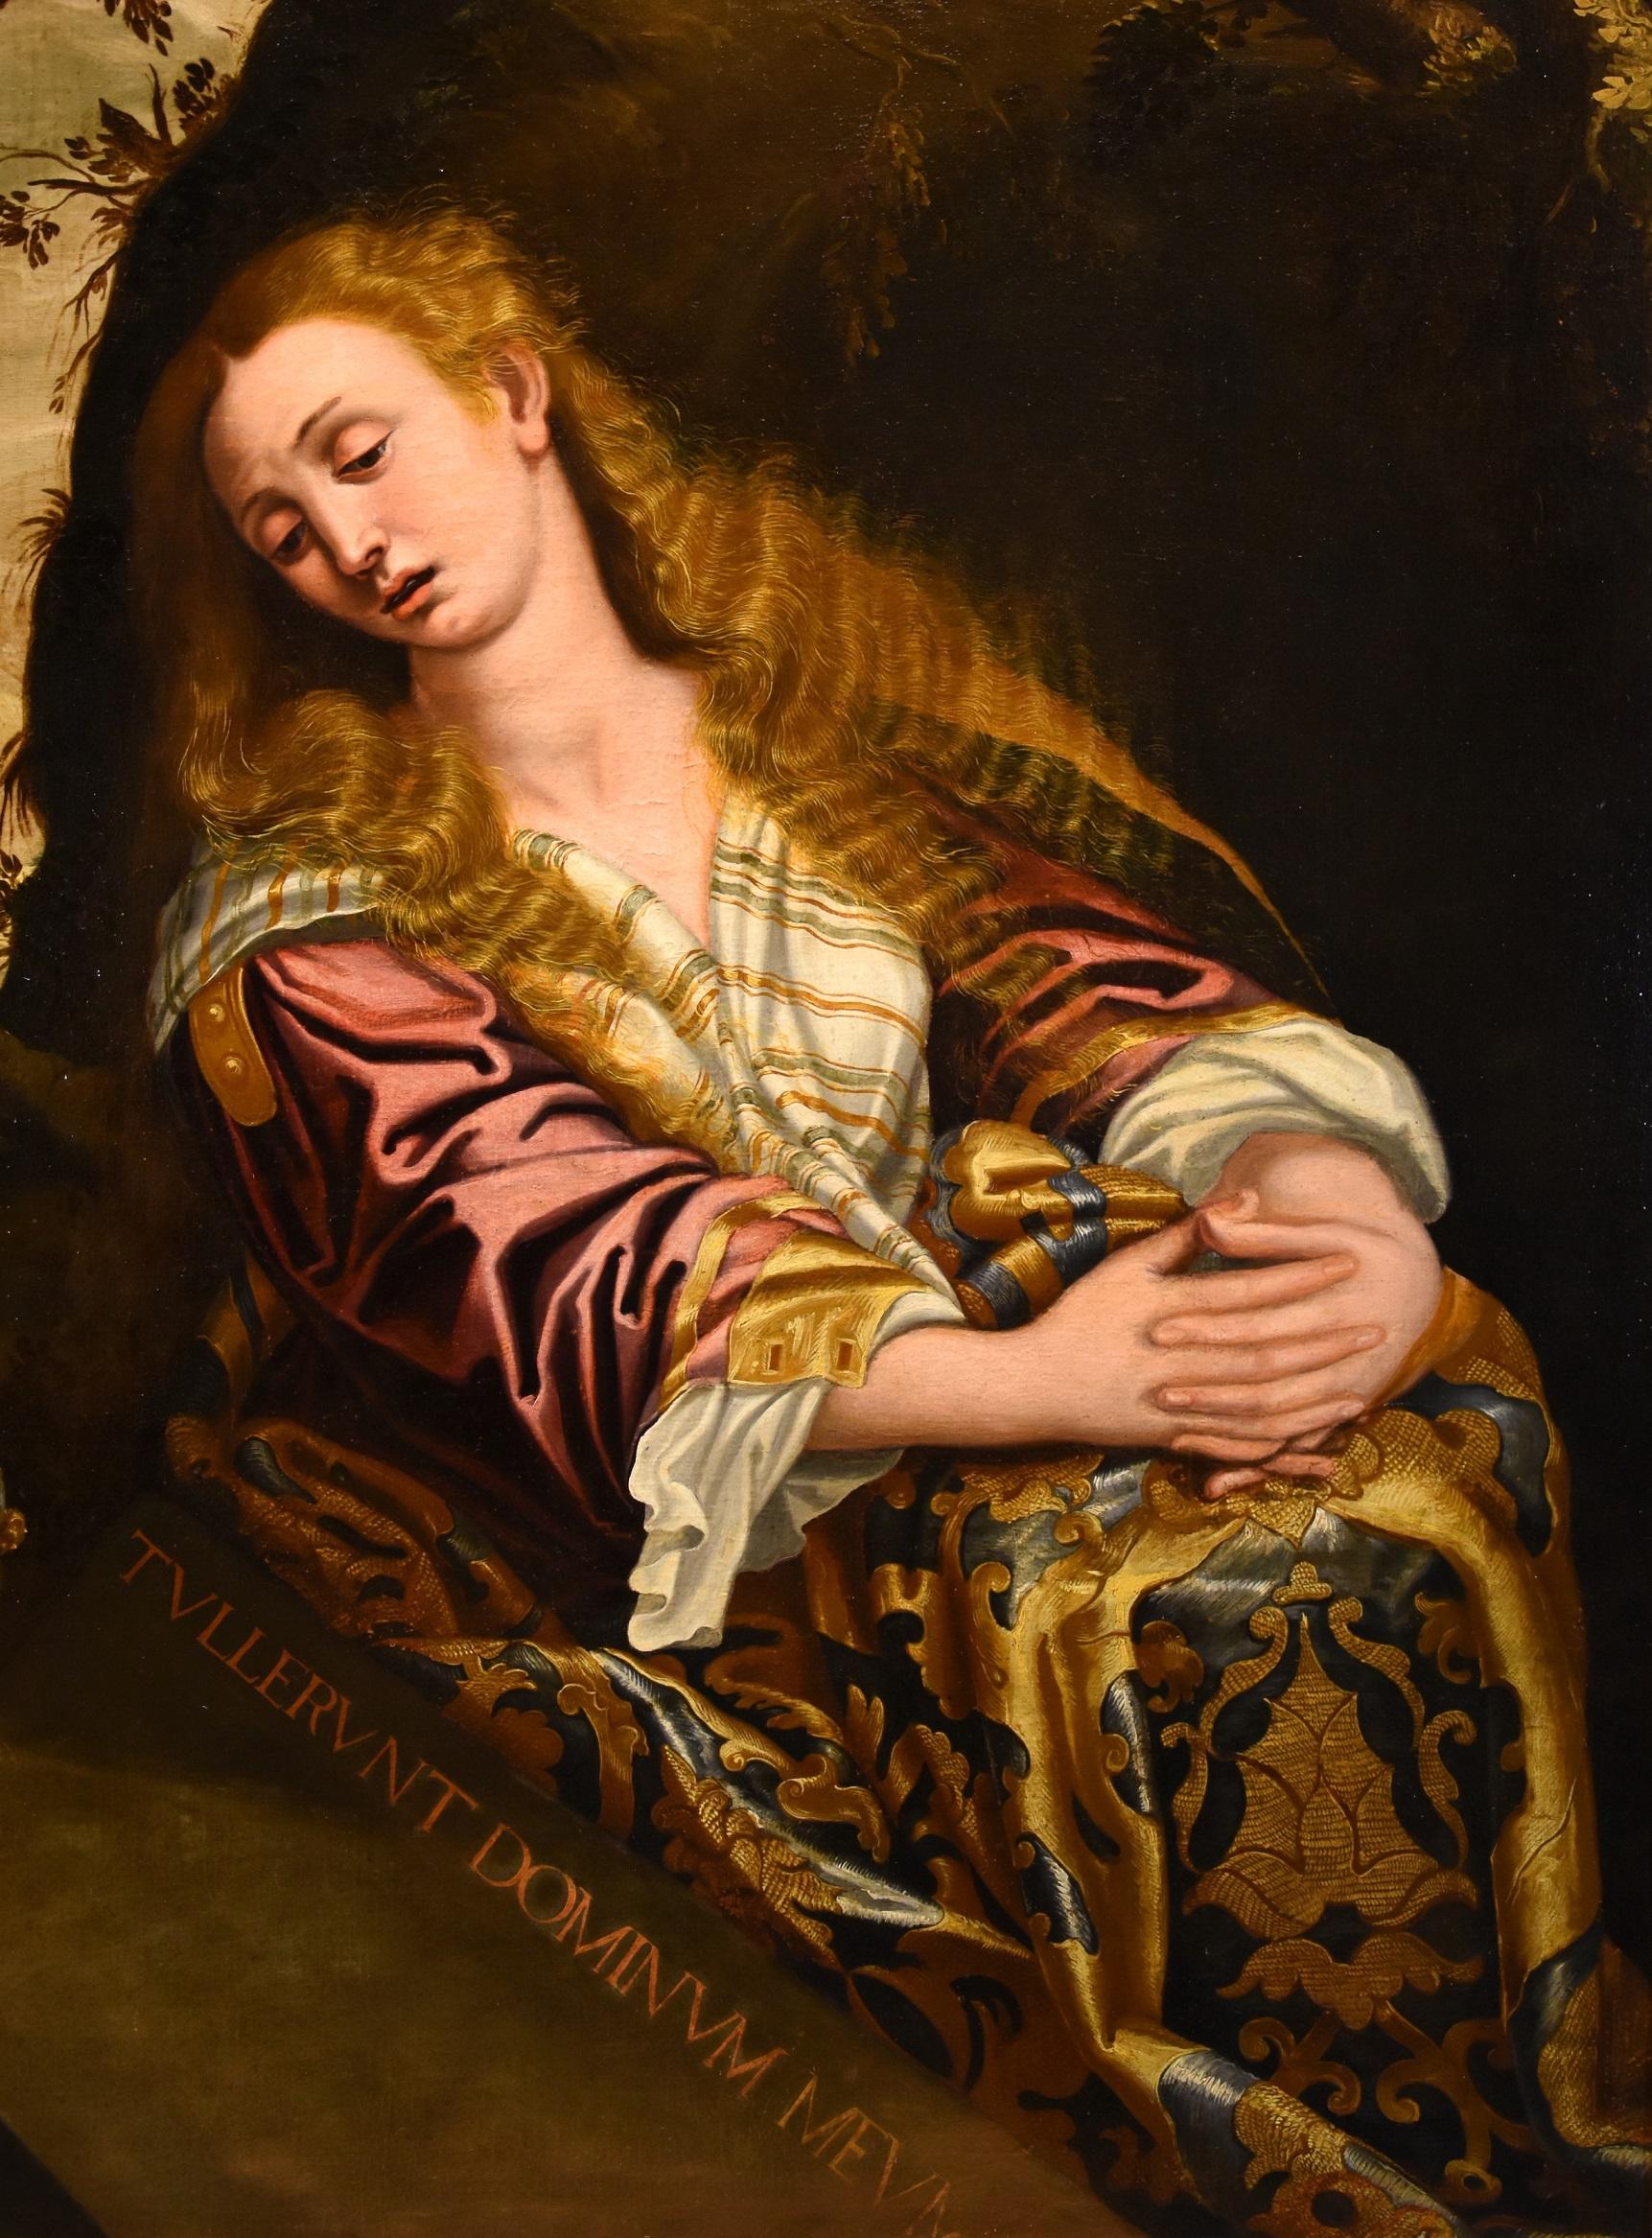 Mary Magdalena Pulzone Paint oil on canvas 17th Century Old master Portrait Art  - Old Masters Painting by Scipione Pulzone, known as Il Gaetano (Gaeta, 1544 - Rome, 1598) workshop of